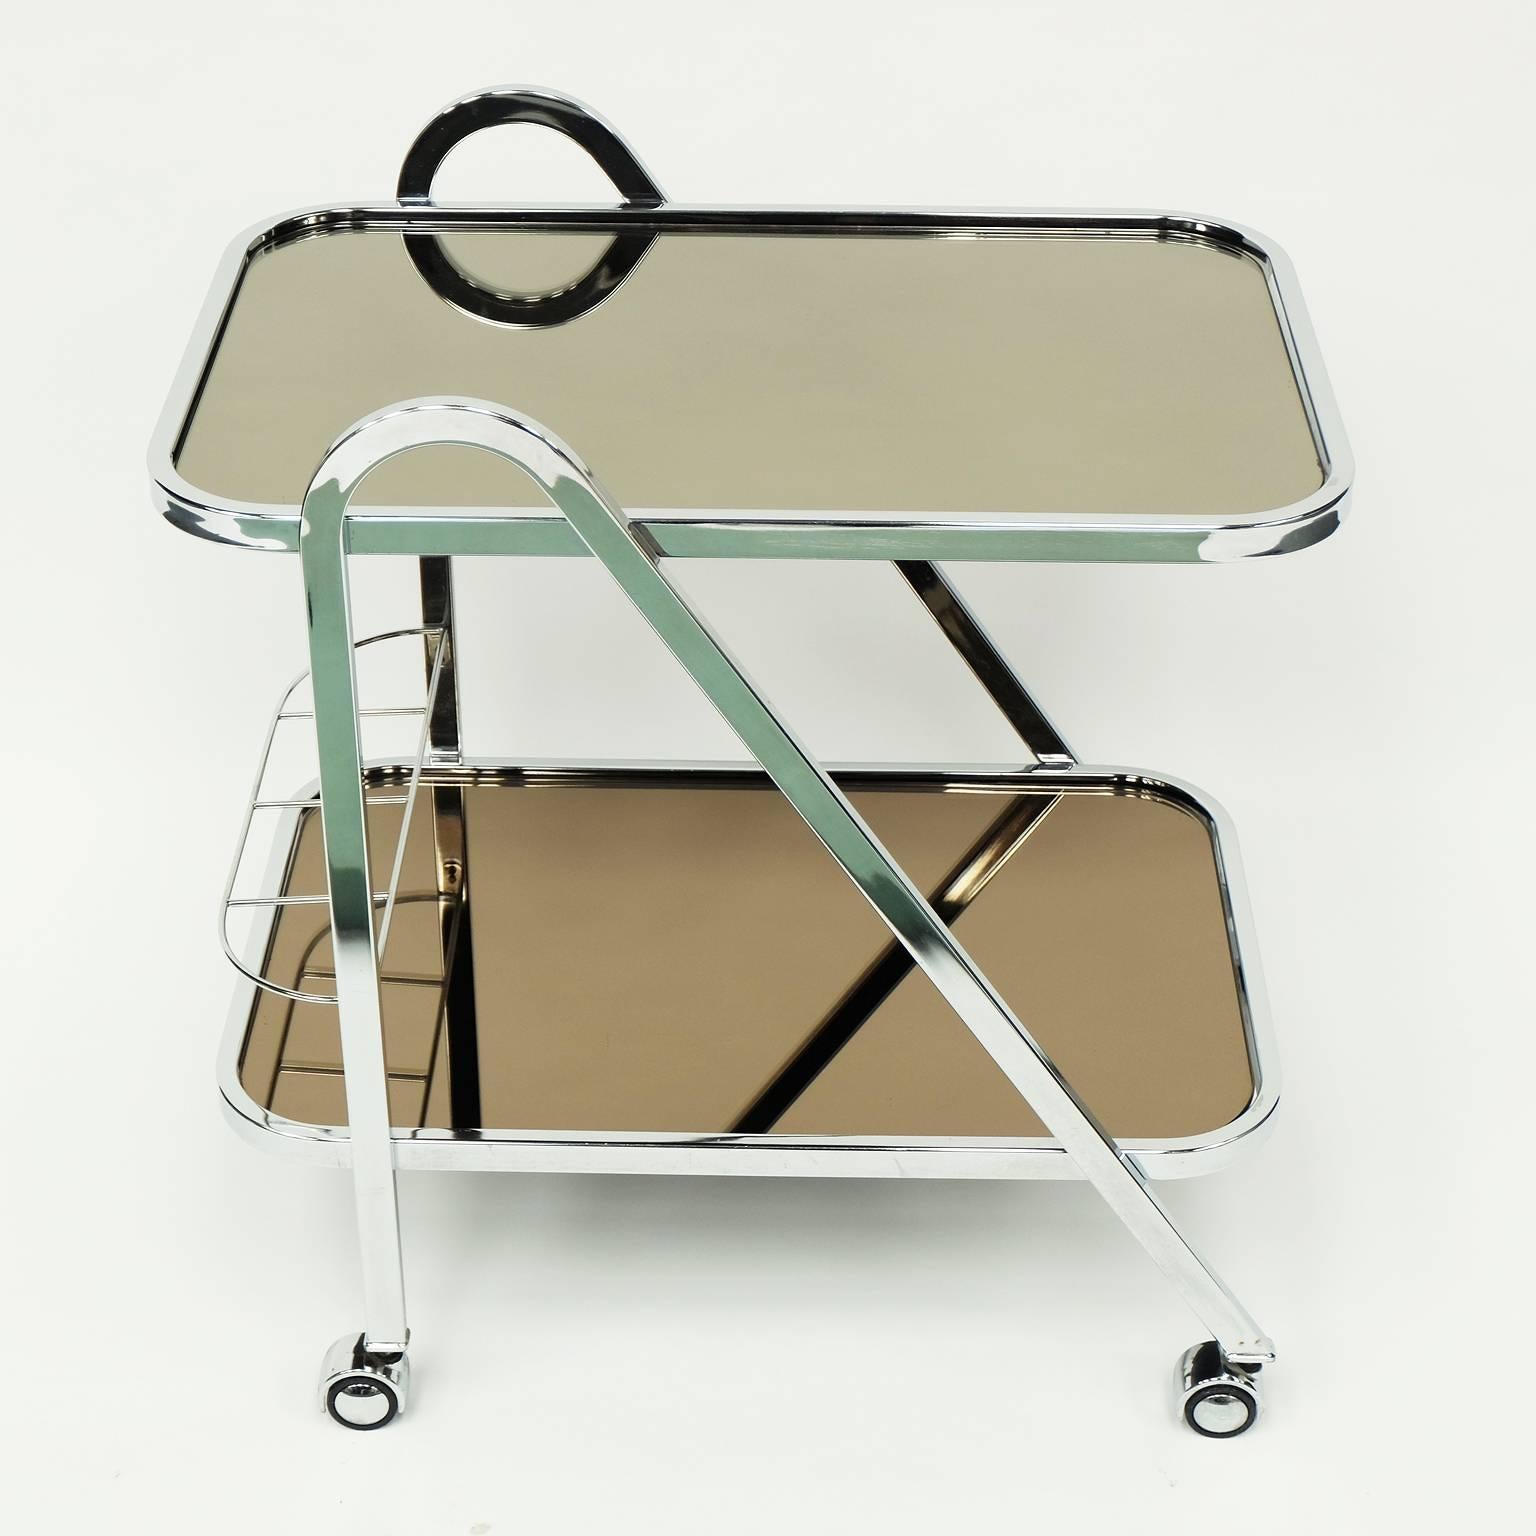 1970s cocktail cart designed and manufactured by Milo Baughman, USA.

Chrome frame with two tinted mirrored glass shelves and bottle rack.

Chrome castors.

Measures: H 75cm x W 70cm x W 48cm.